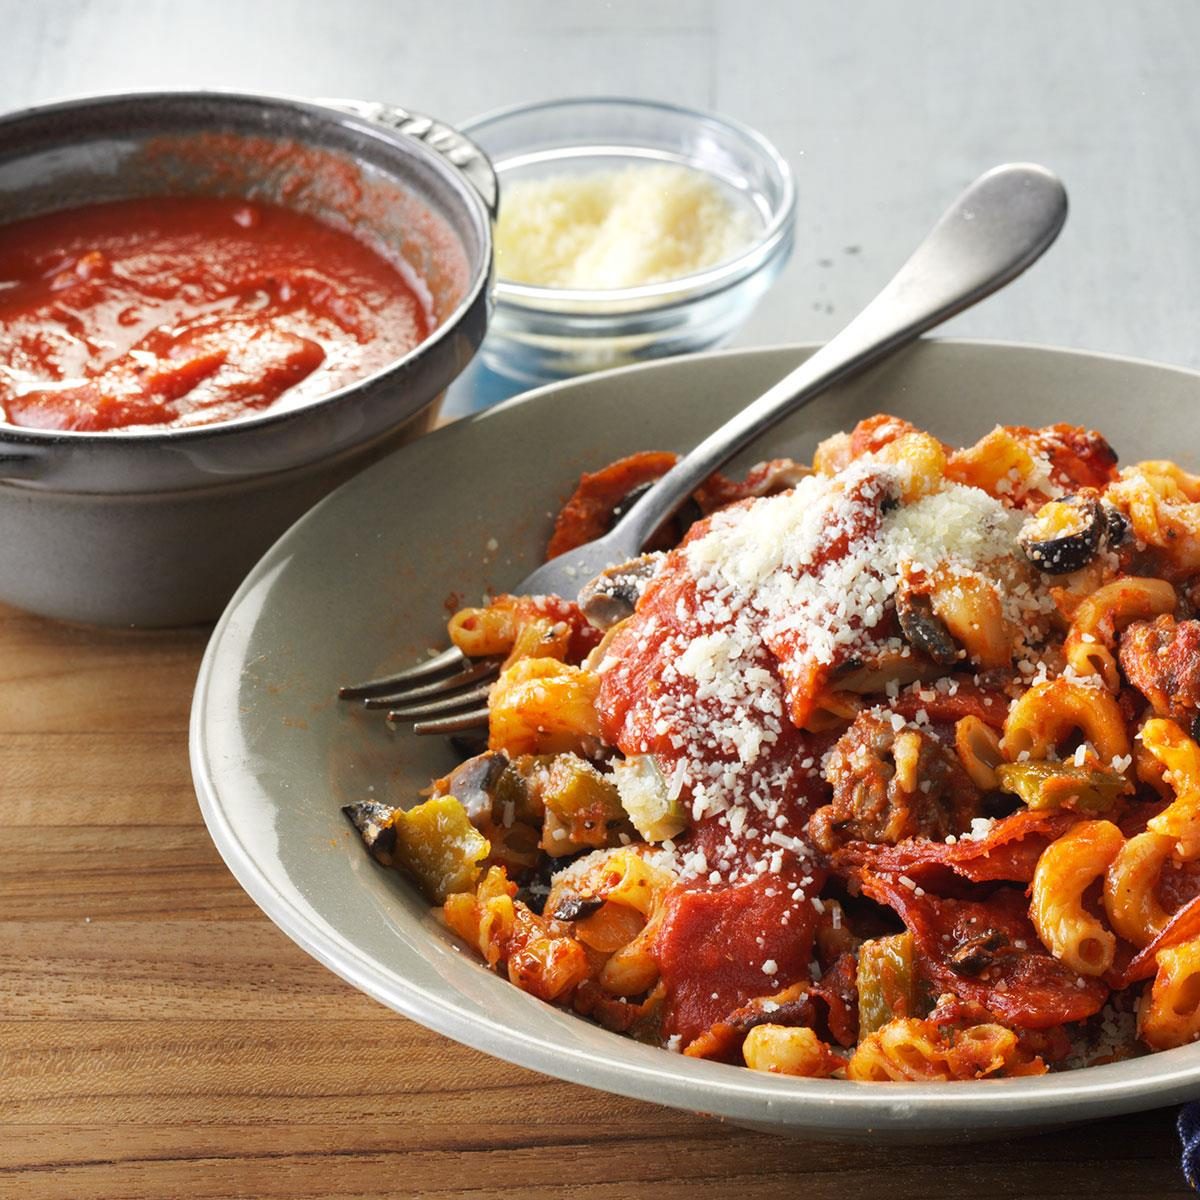 70 Recipes Using Pasta Sauce To Make For Dinner Tonight Taste Of Home